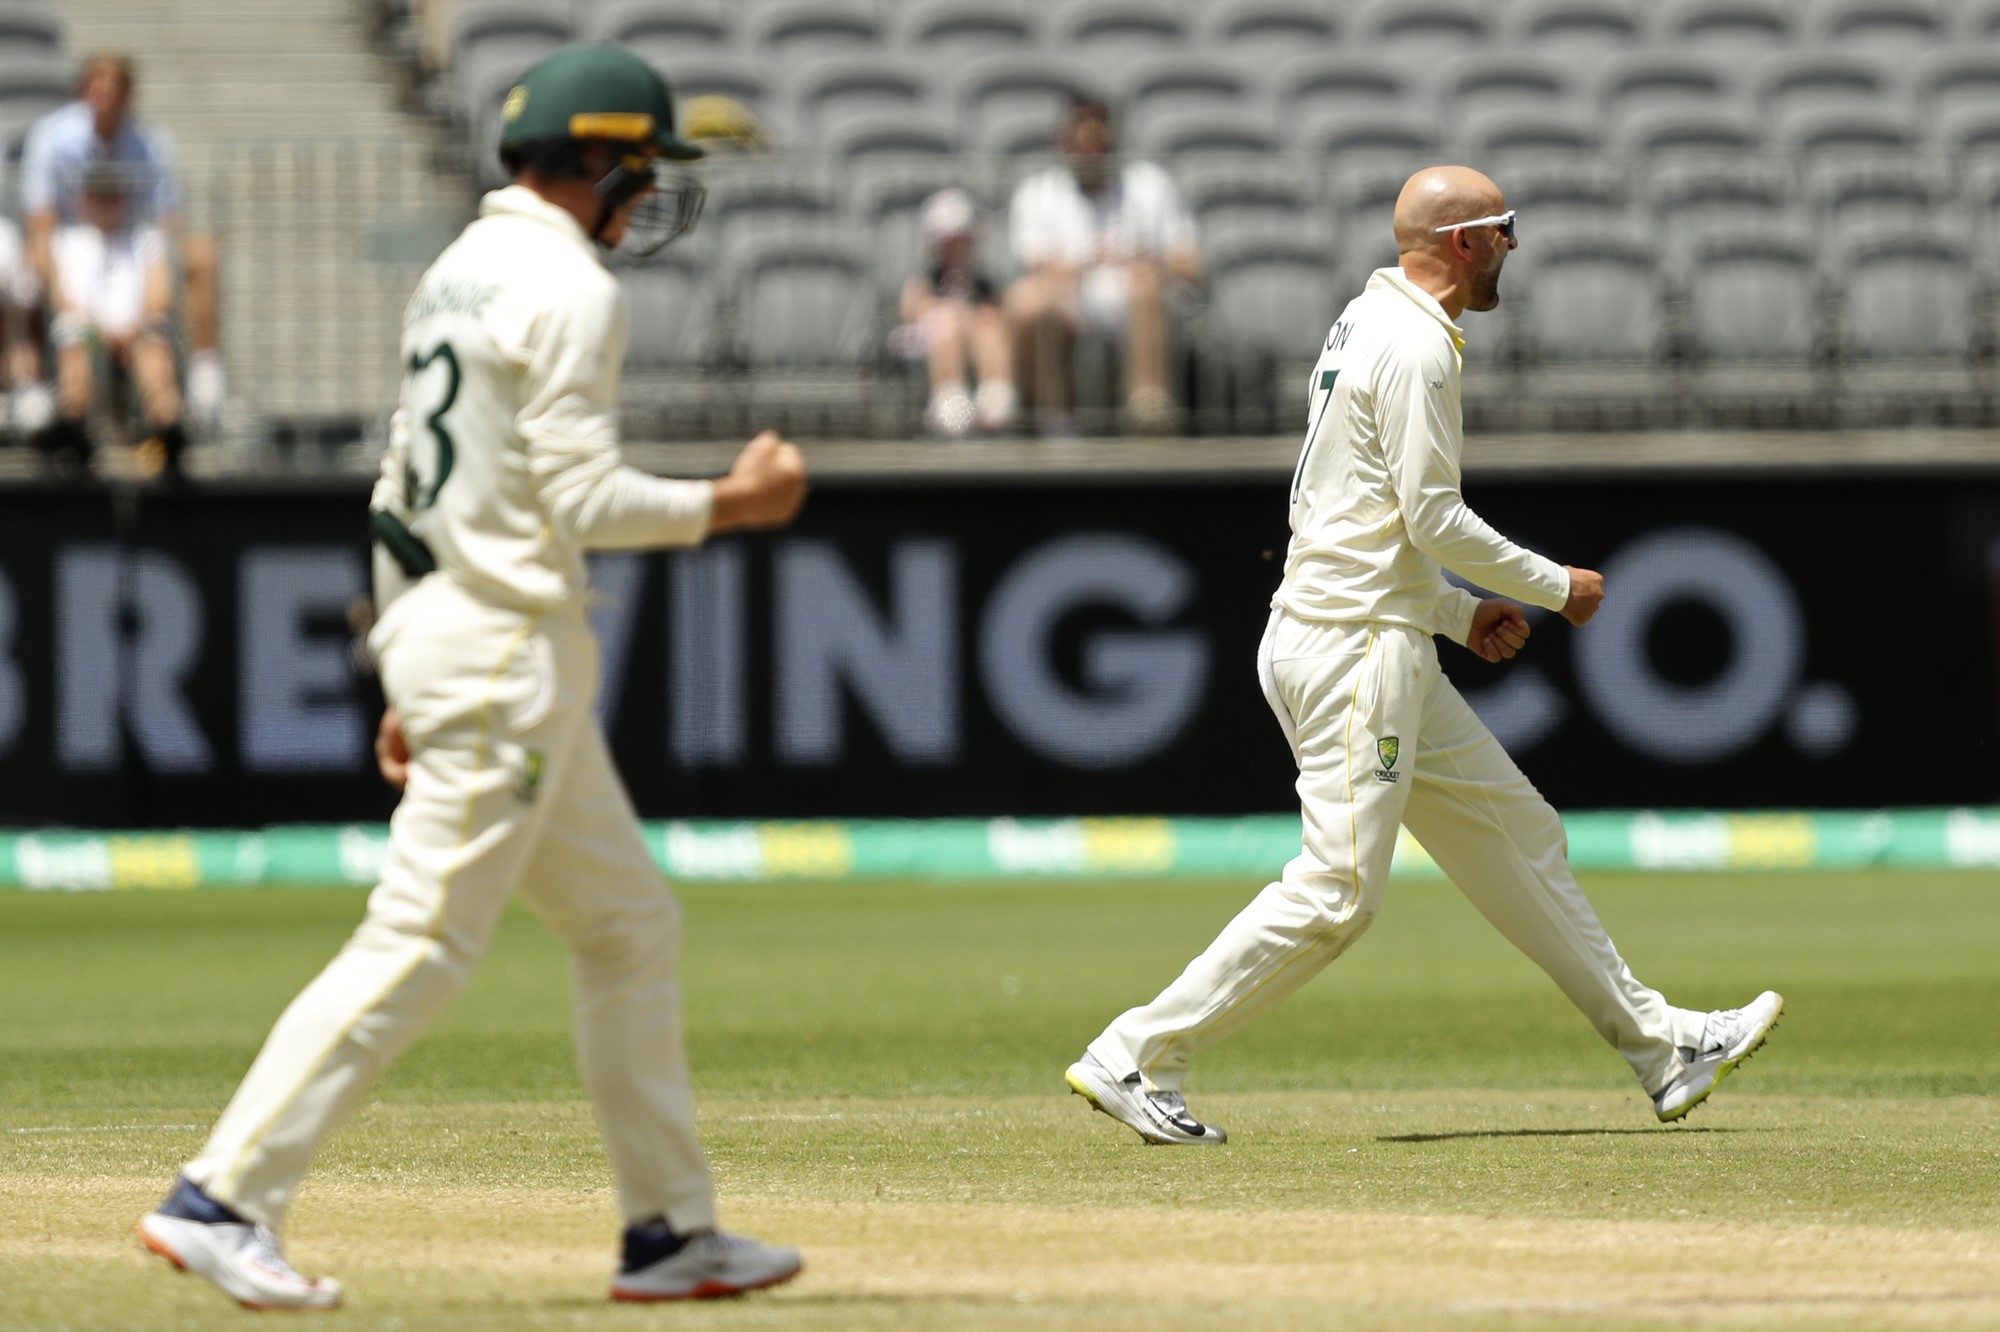 Australia bowler Nathan Lyon fist pumps after a wicket in the Test against West Indies. Marnus Labuschagne is in the foreground.